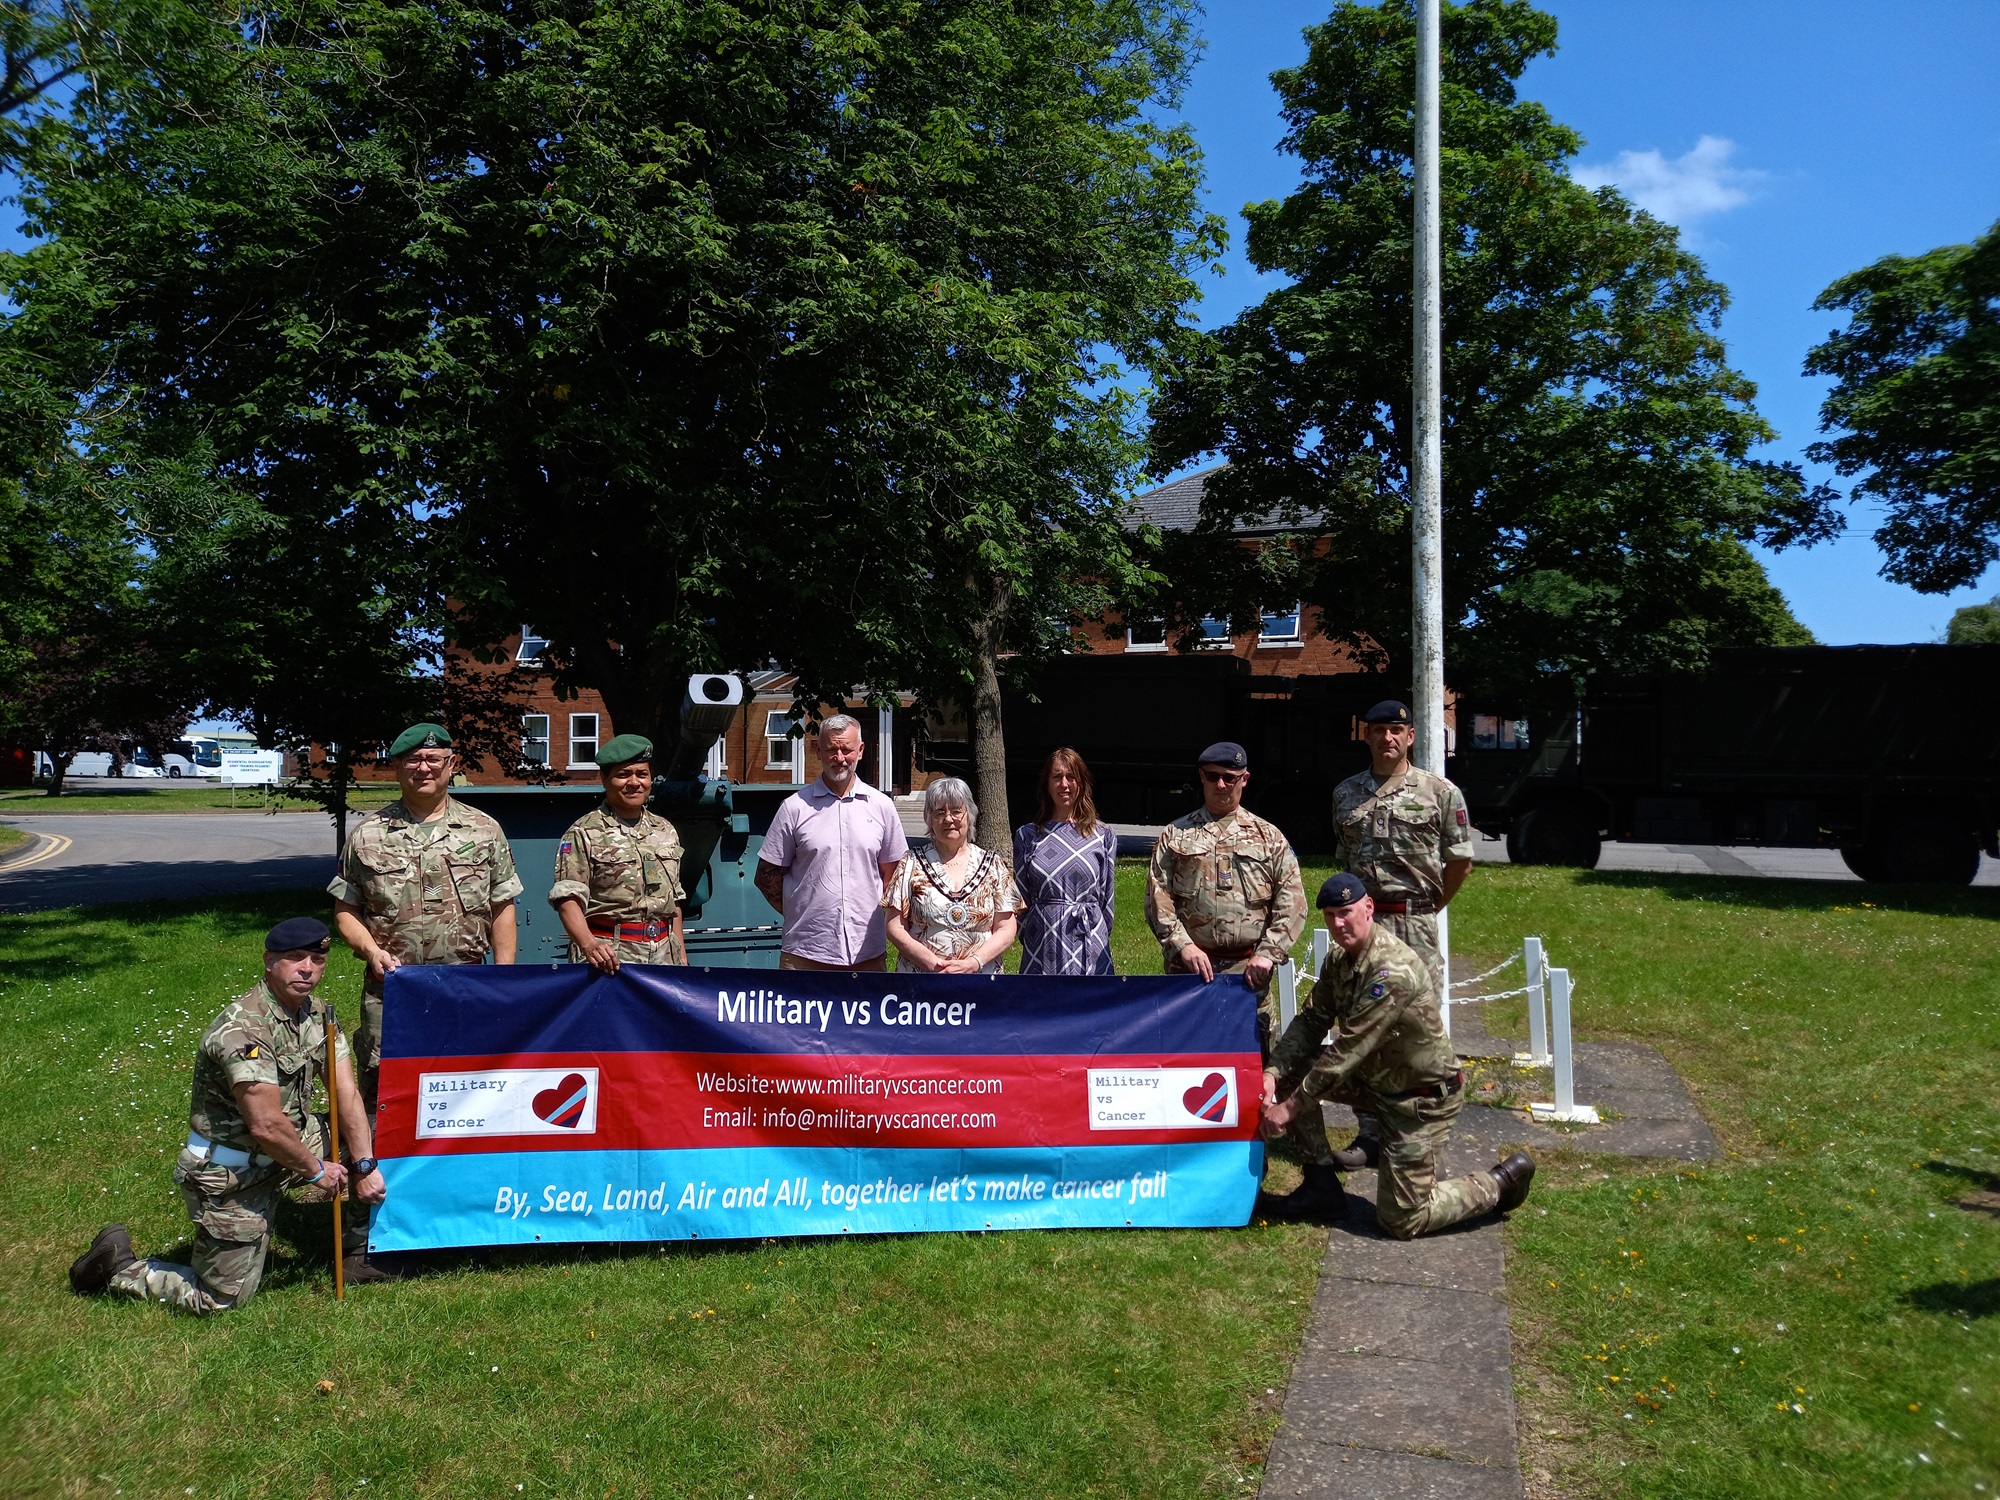 Cllr Johnson (centre) with David and Shelley Bathgate, Lt Col Duncan Lowe (standing right) and Army colleagues